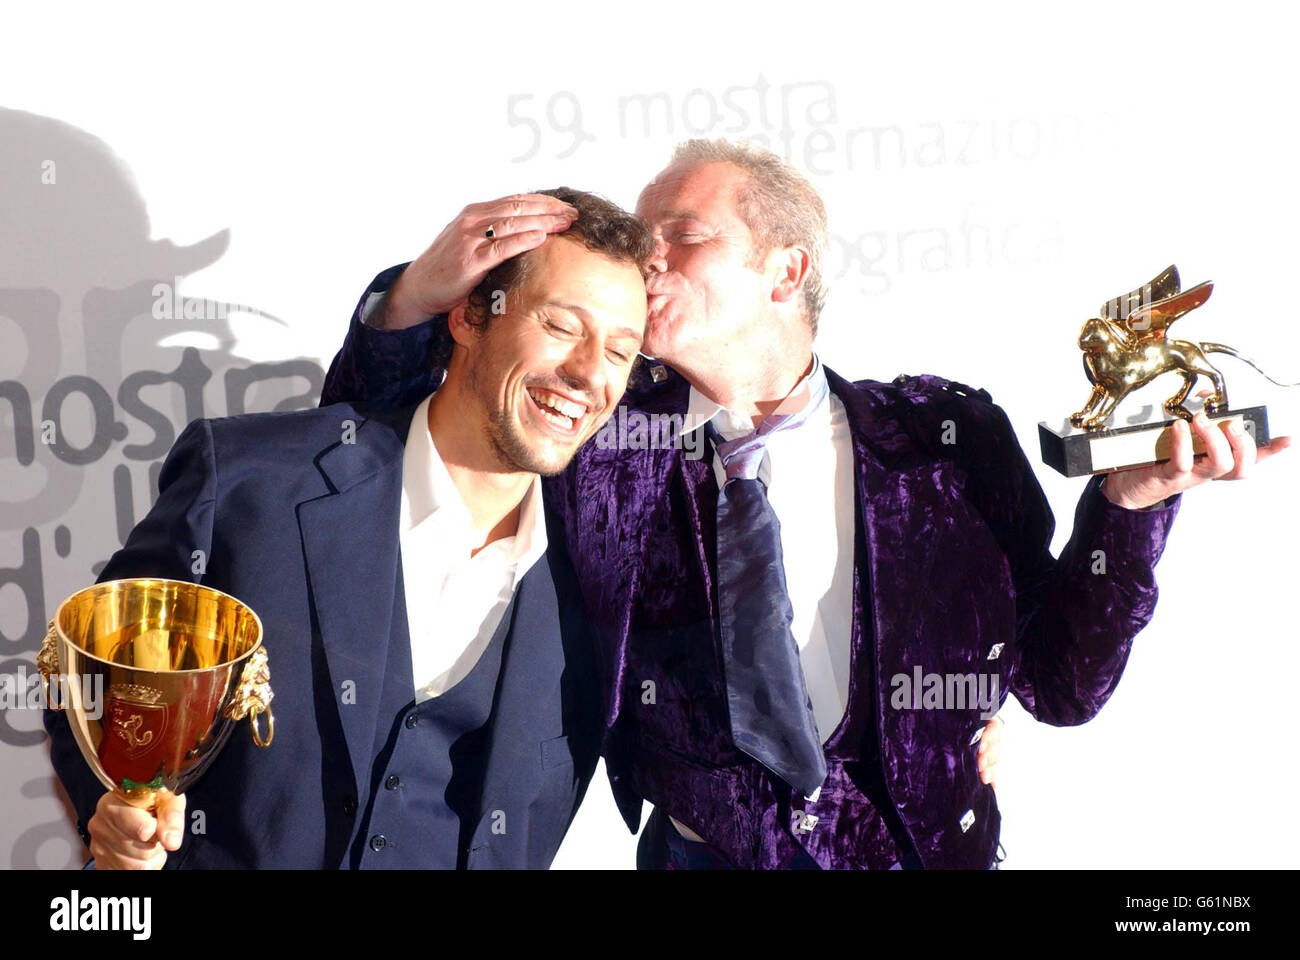 Scottish director Peter Mullan (right) holds the Golden Lion award whilst kissing Italian Actor Stefano Accorsi with his Best Actor award for the movie 'Un viaggio chiamatto amore', during the closing ceremony of the 59th Venice film festival, Venice, Lido, Italy. *....Mullan won the Golden Lion award for his film 'The Magdalene Sisters'. Stock Photo